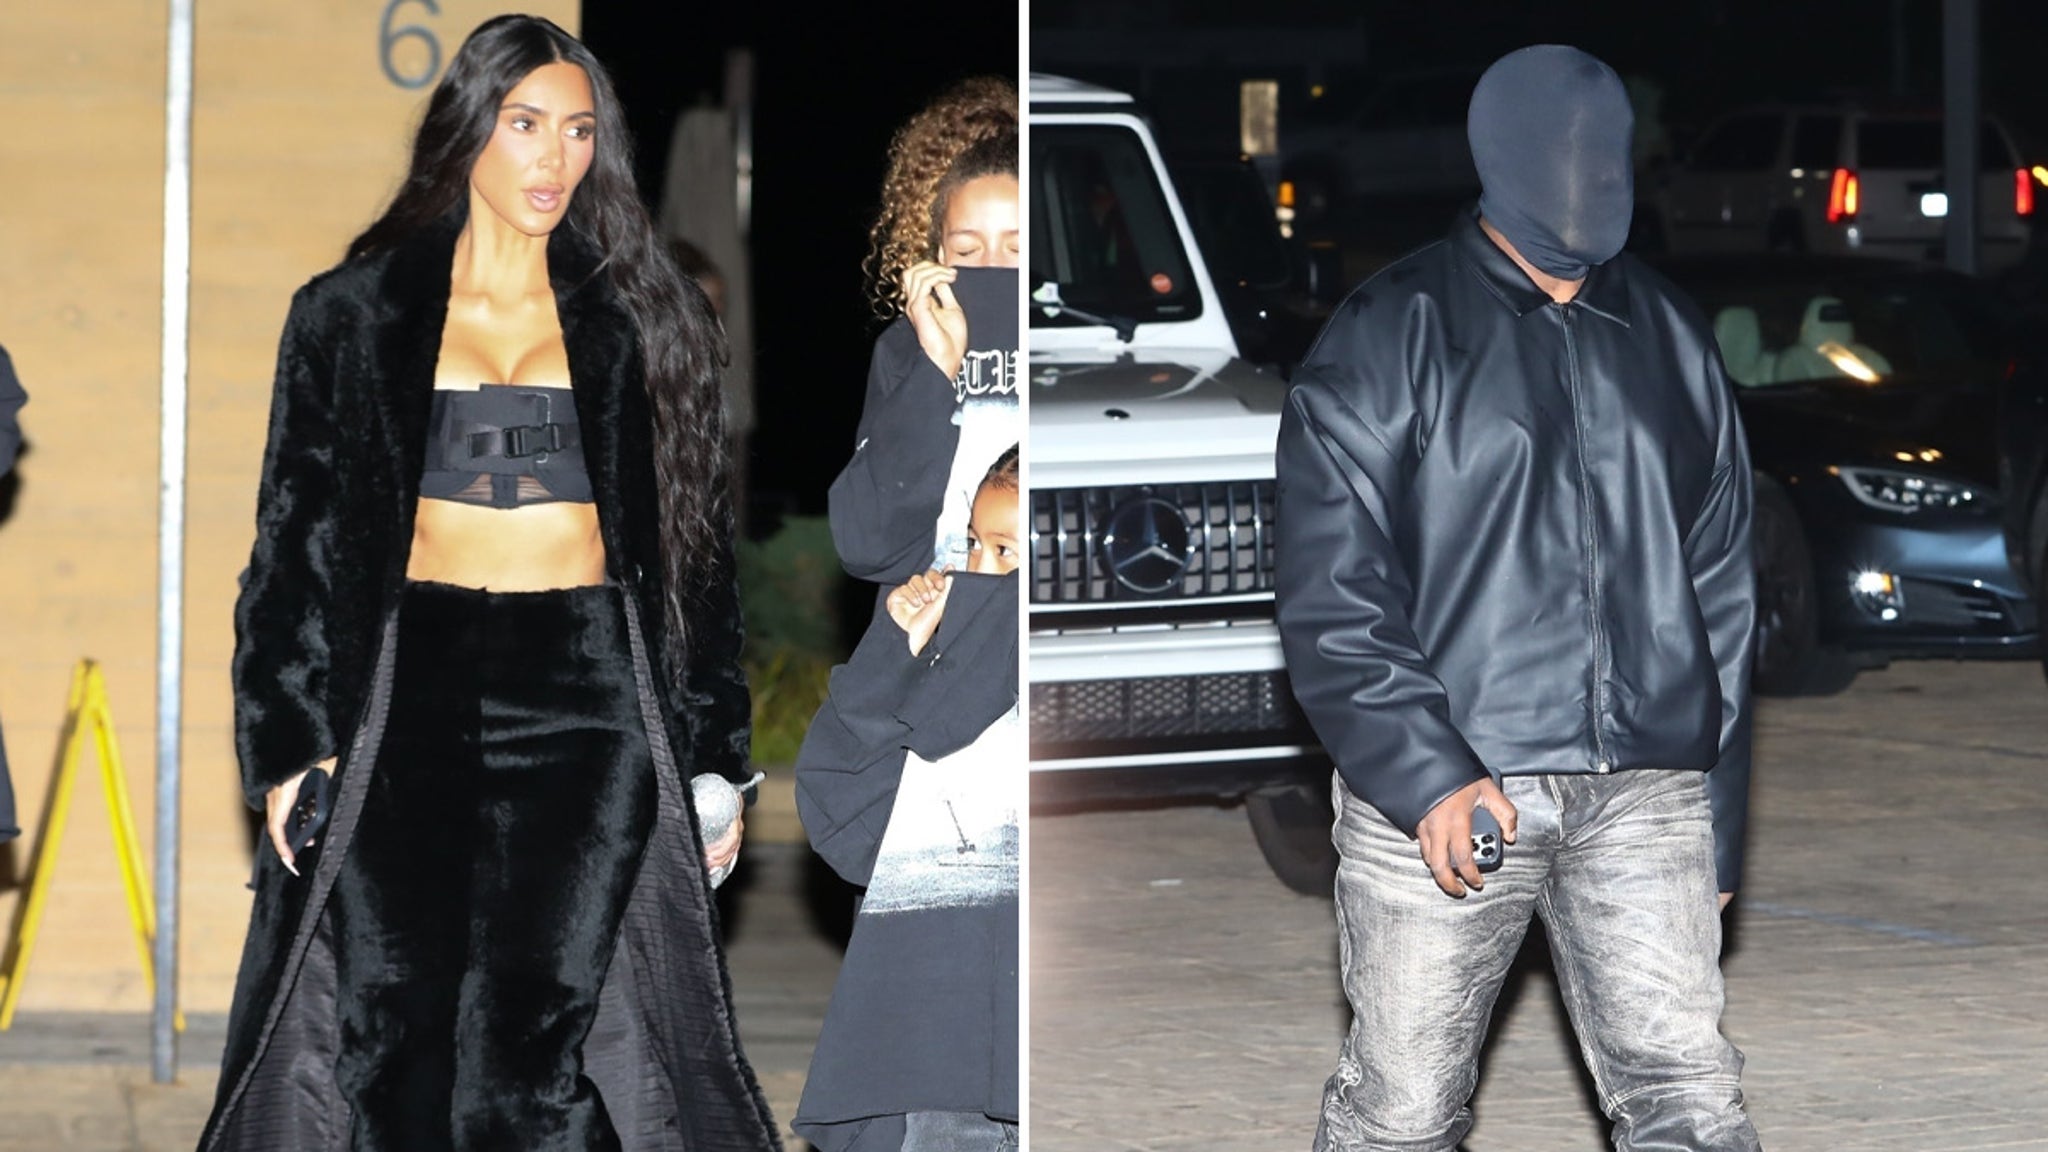 Kim & Kanye Reunite For Dinner with North, Friends Wear ‘Vultures’ Shirts